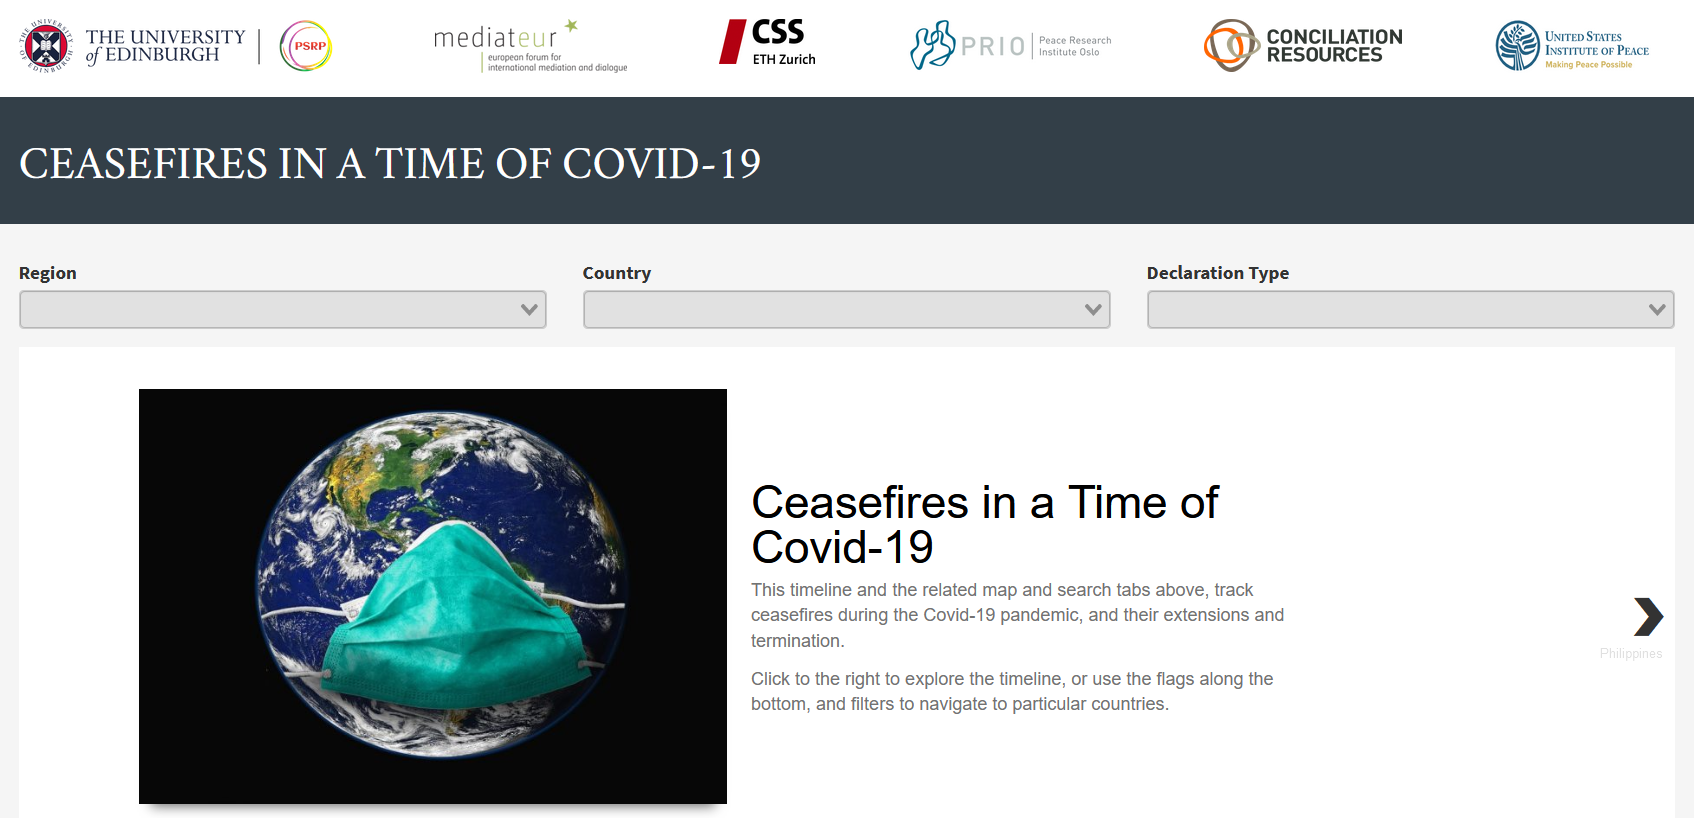 Ceasefires in a Time of Covid-19